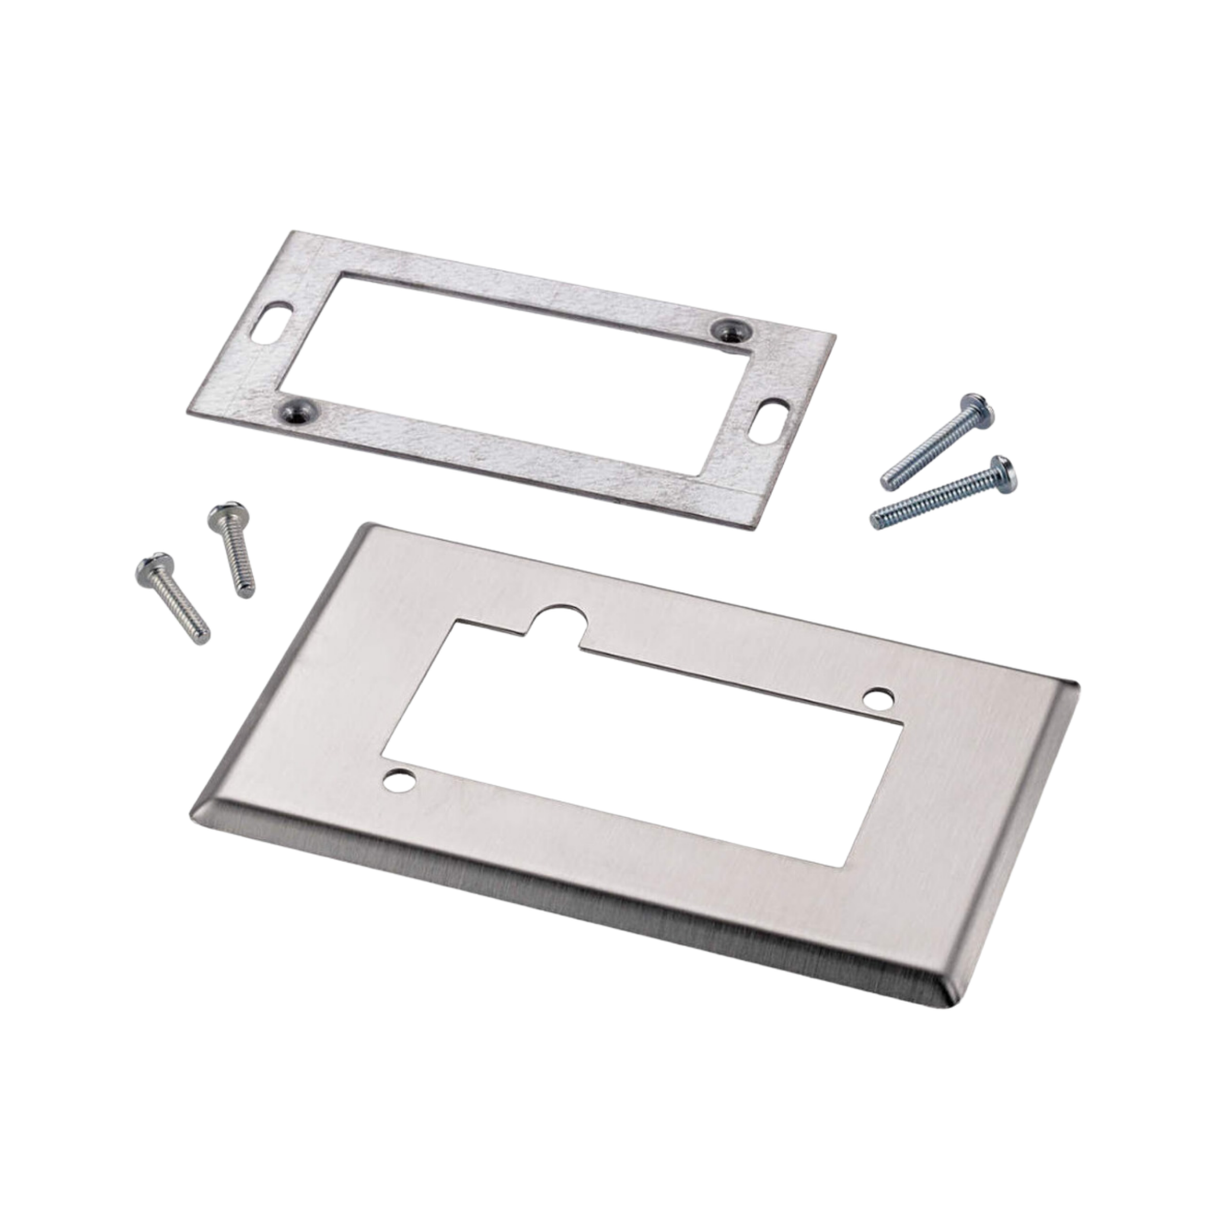 Johnson Controls TE-1800-9600 Stainless Steel, Finish Wallplate Cover Kit